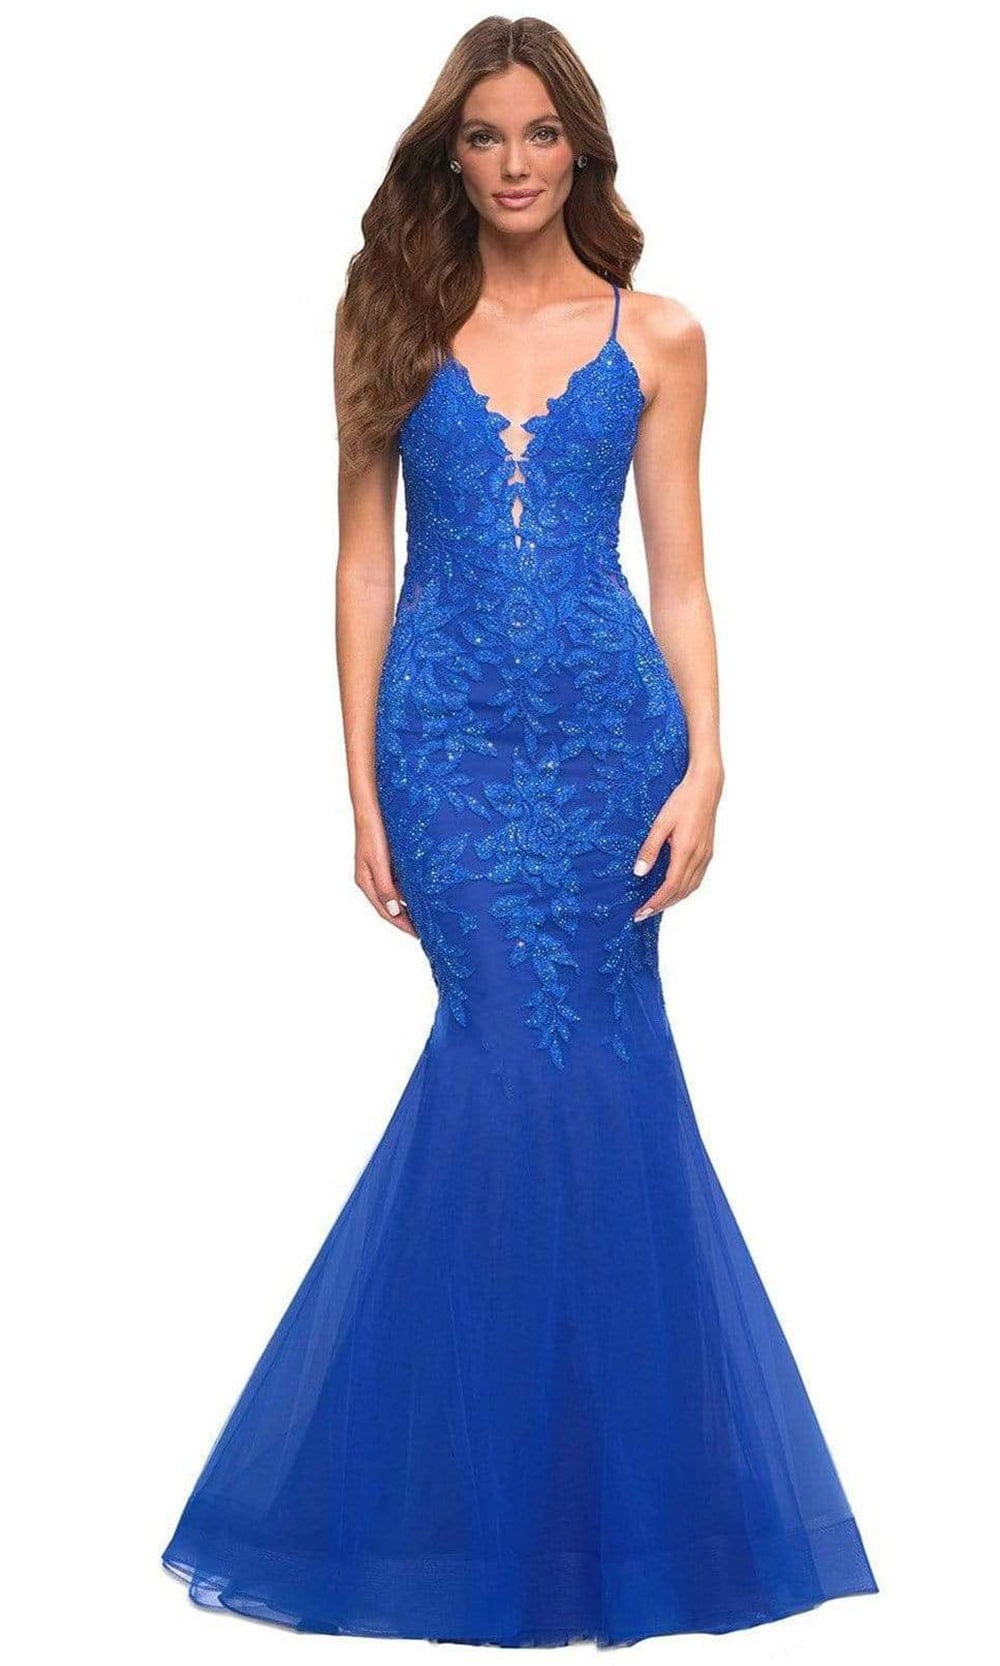 Image of La Femme - 30584 Beaded Lace Mermaid Gown